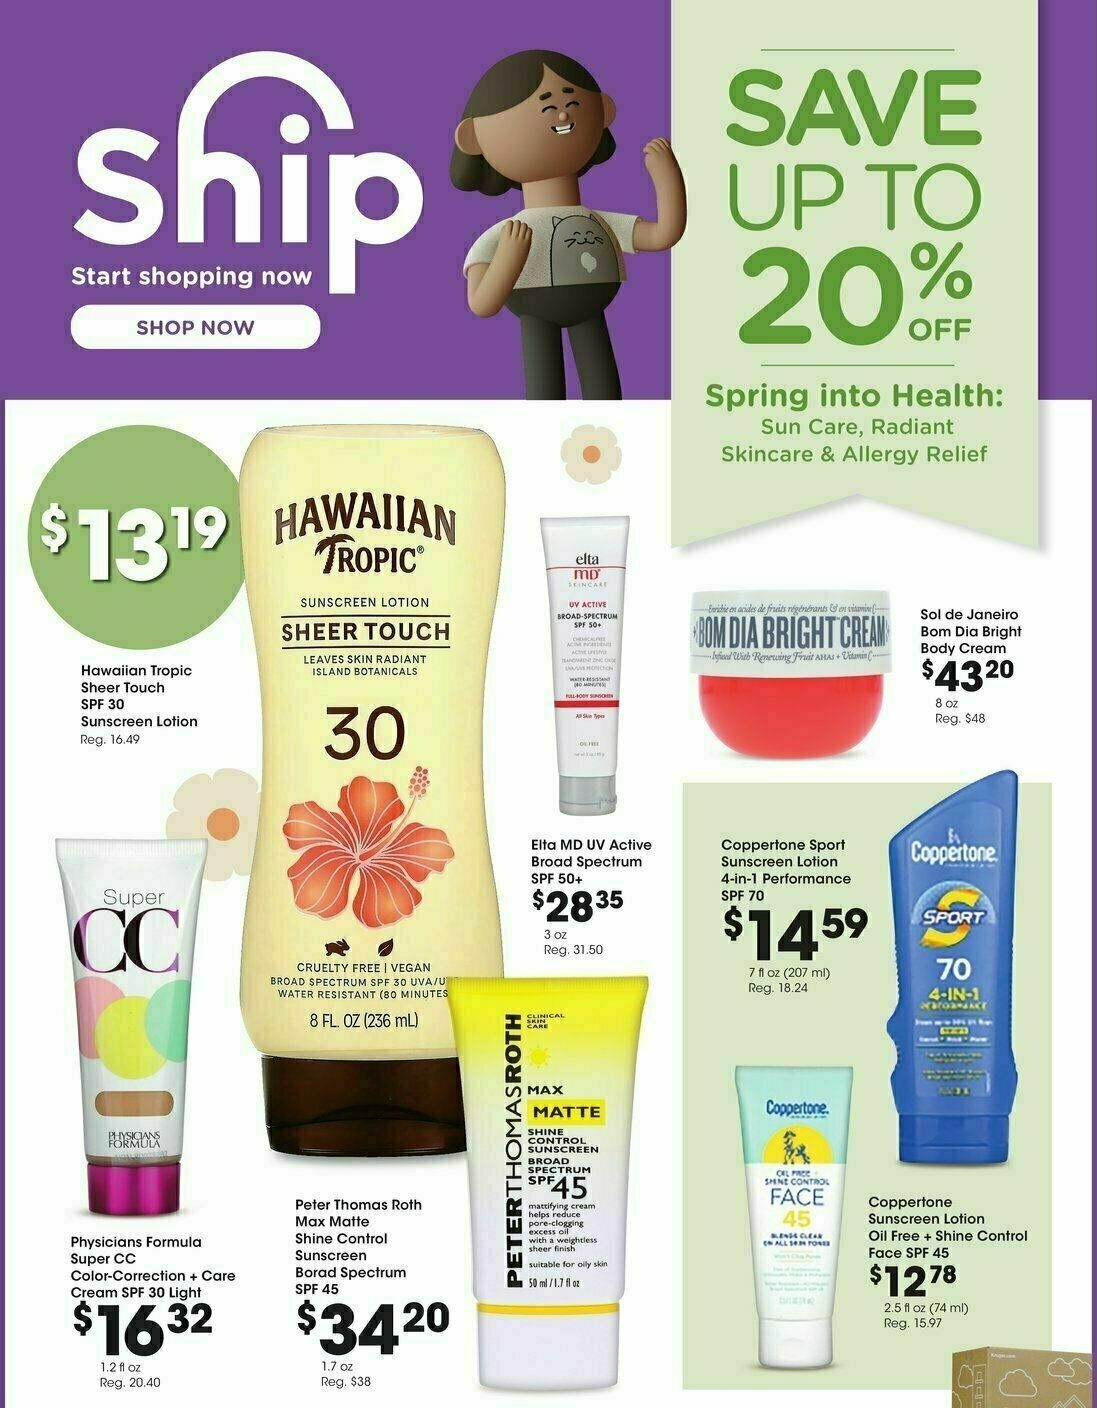 Fred Meyer Ship to Home Weekly Ad from February 28